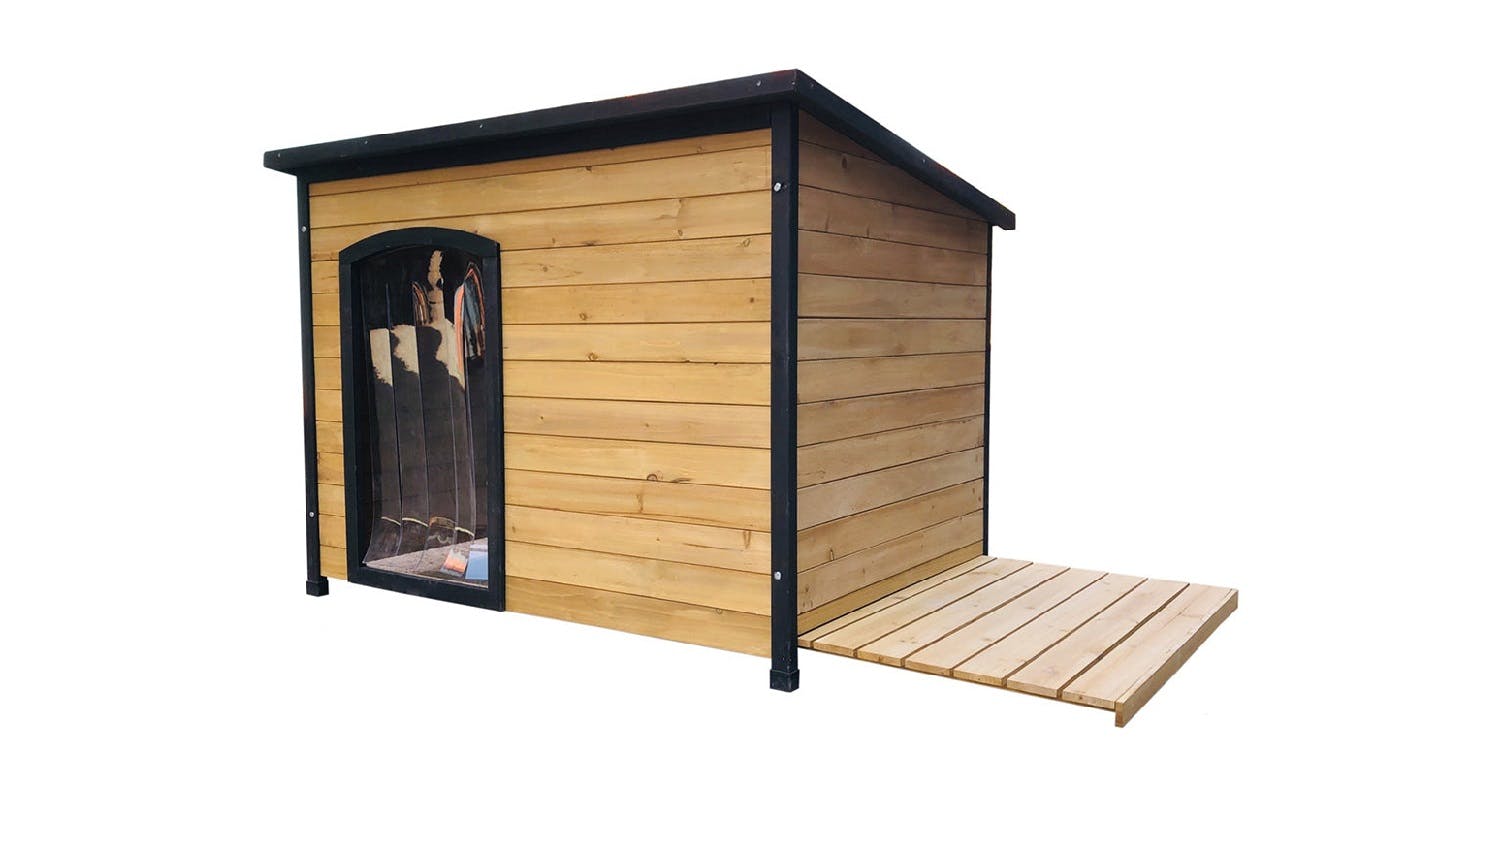 TSB Living Wooden Dog Kennel with Hunge Roof, PVC Door Flap